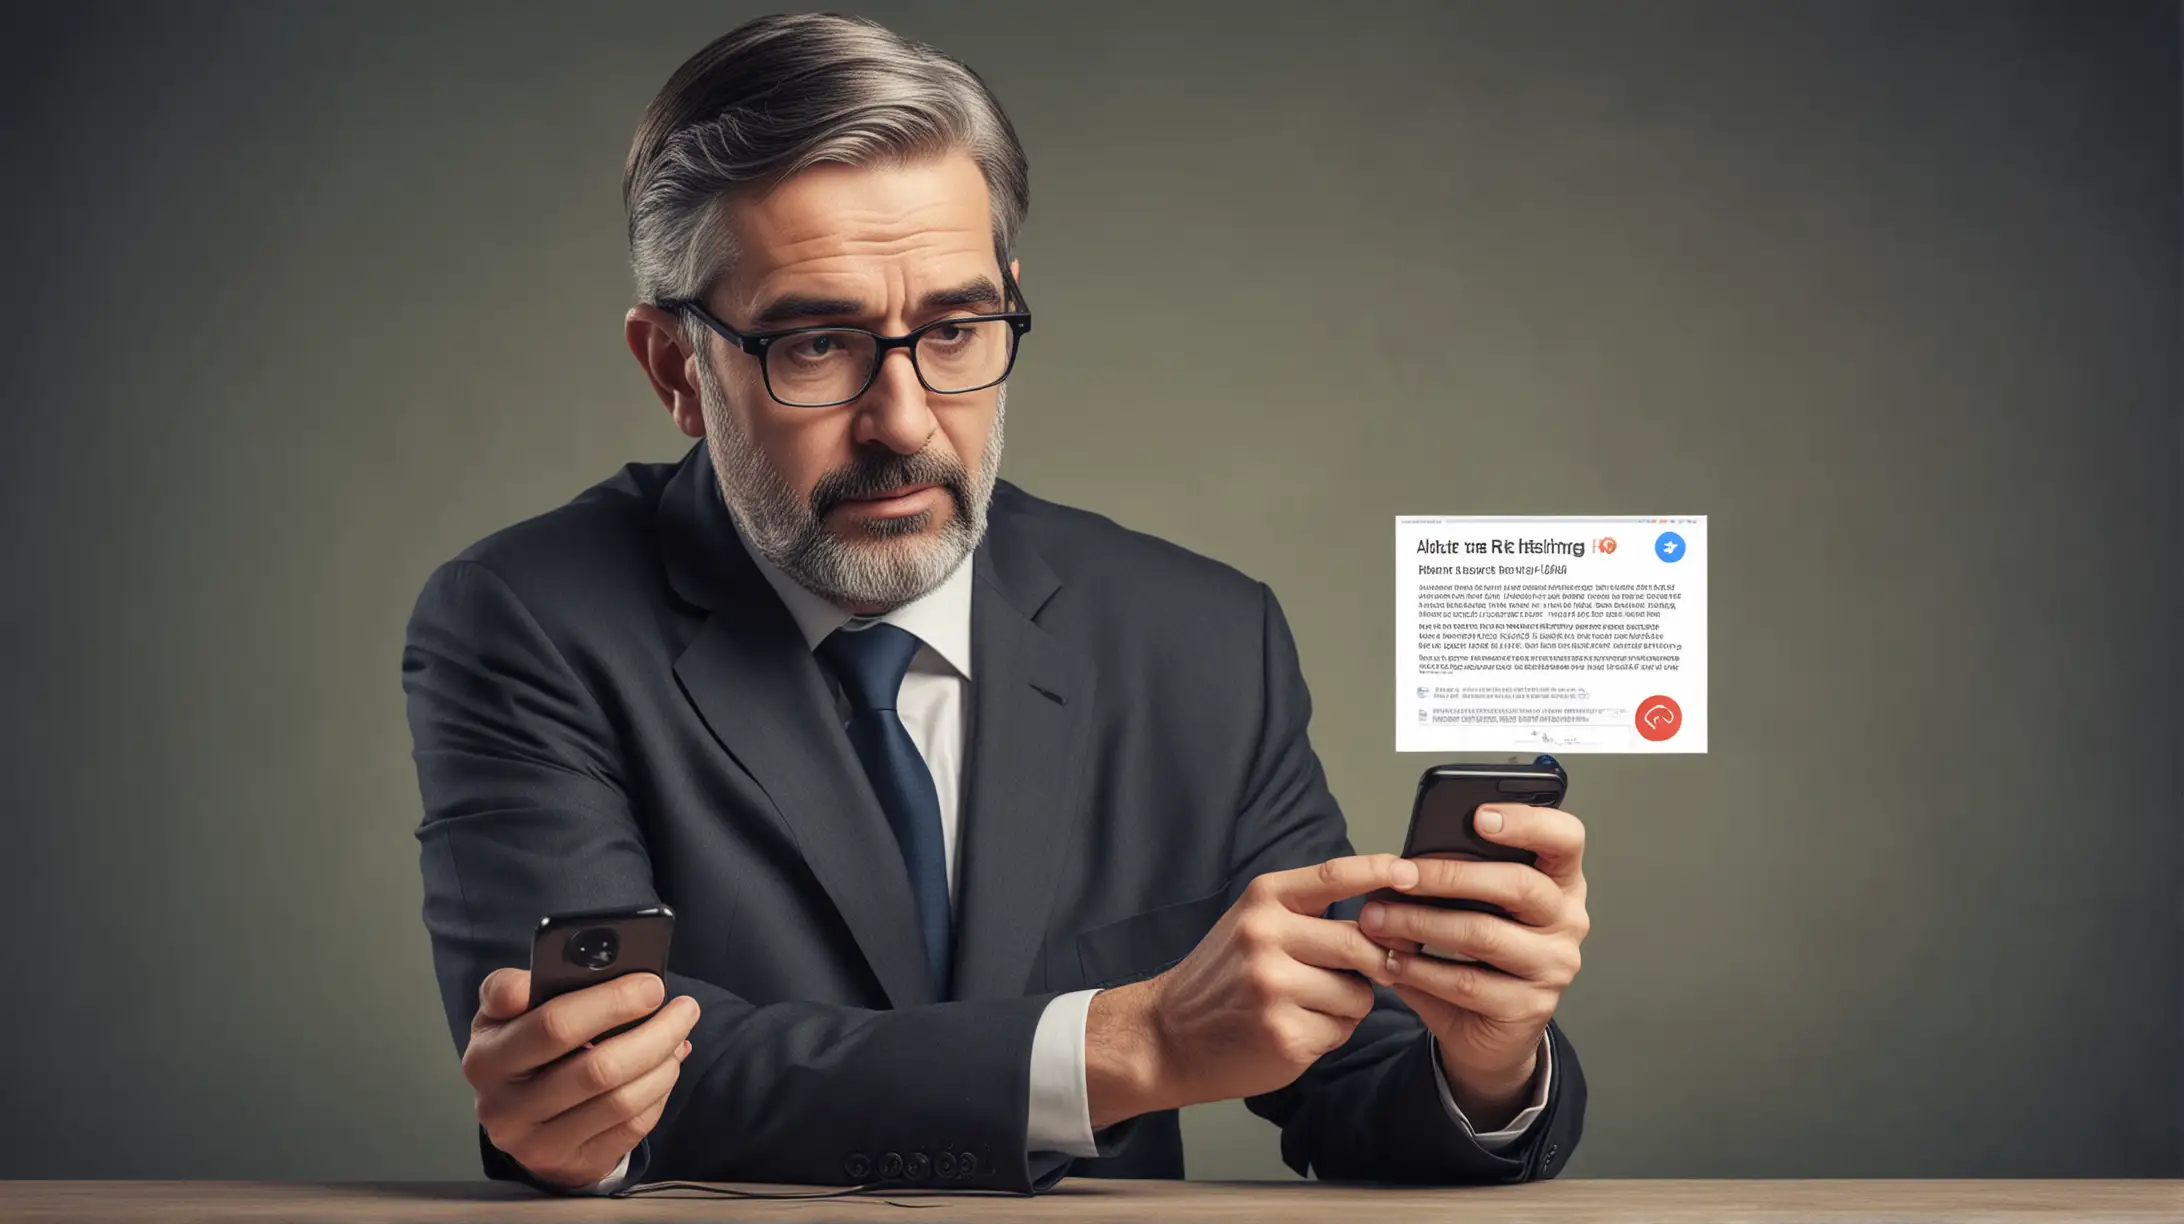 politician looking at a phishing e-Mail on his phone